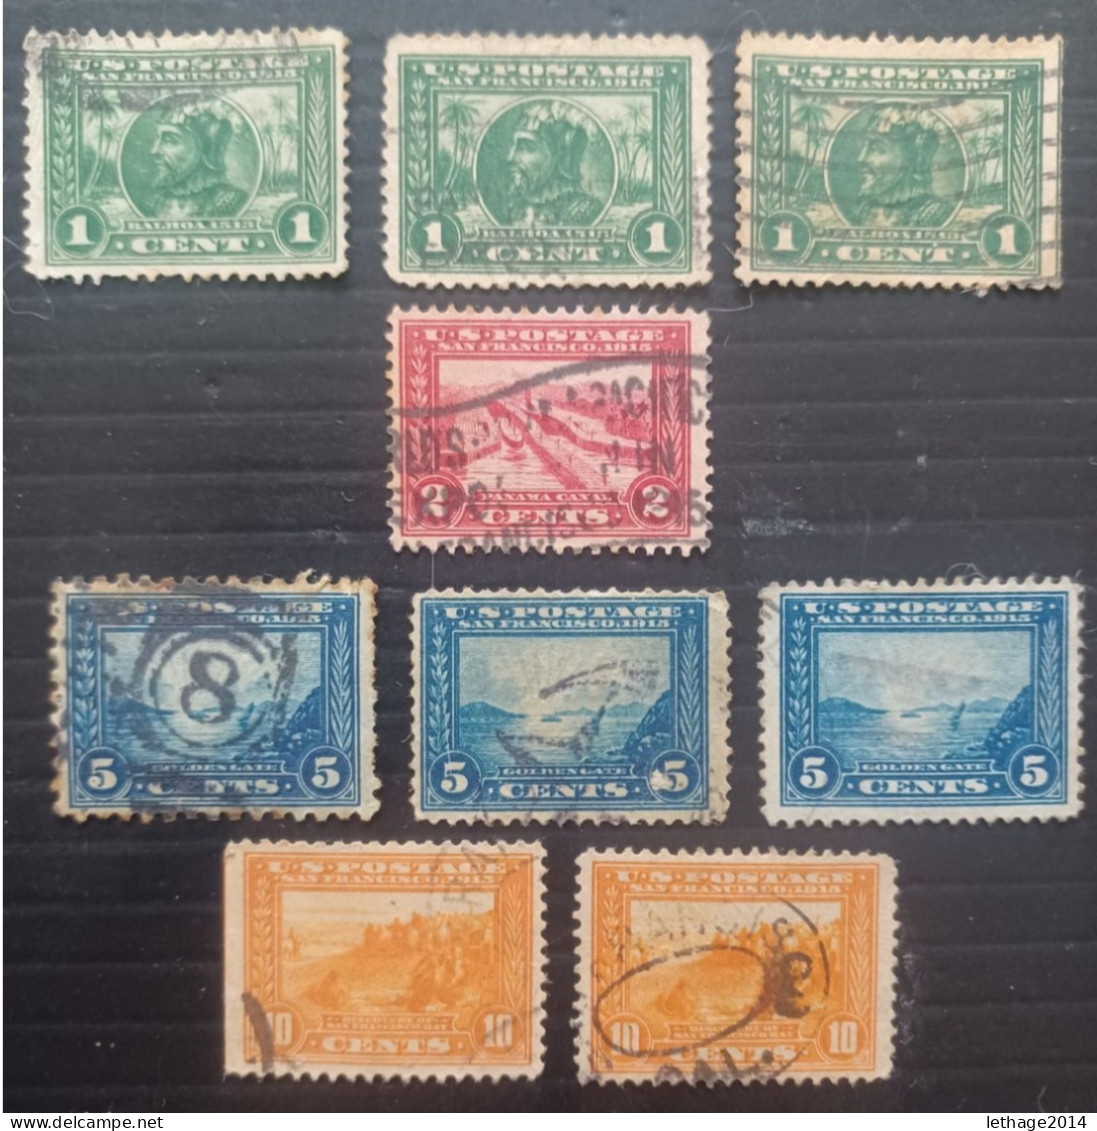 UNITED STATE 1913 PANAMA PACIFIC EXPOSITION SC N 397-398-399-400 DIFFERENT PERFORATIONS - Gebruikt